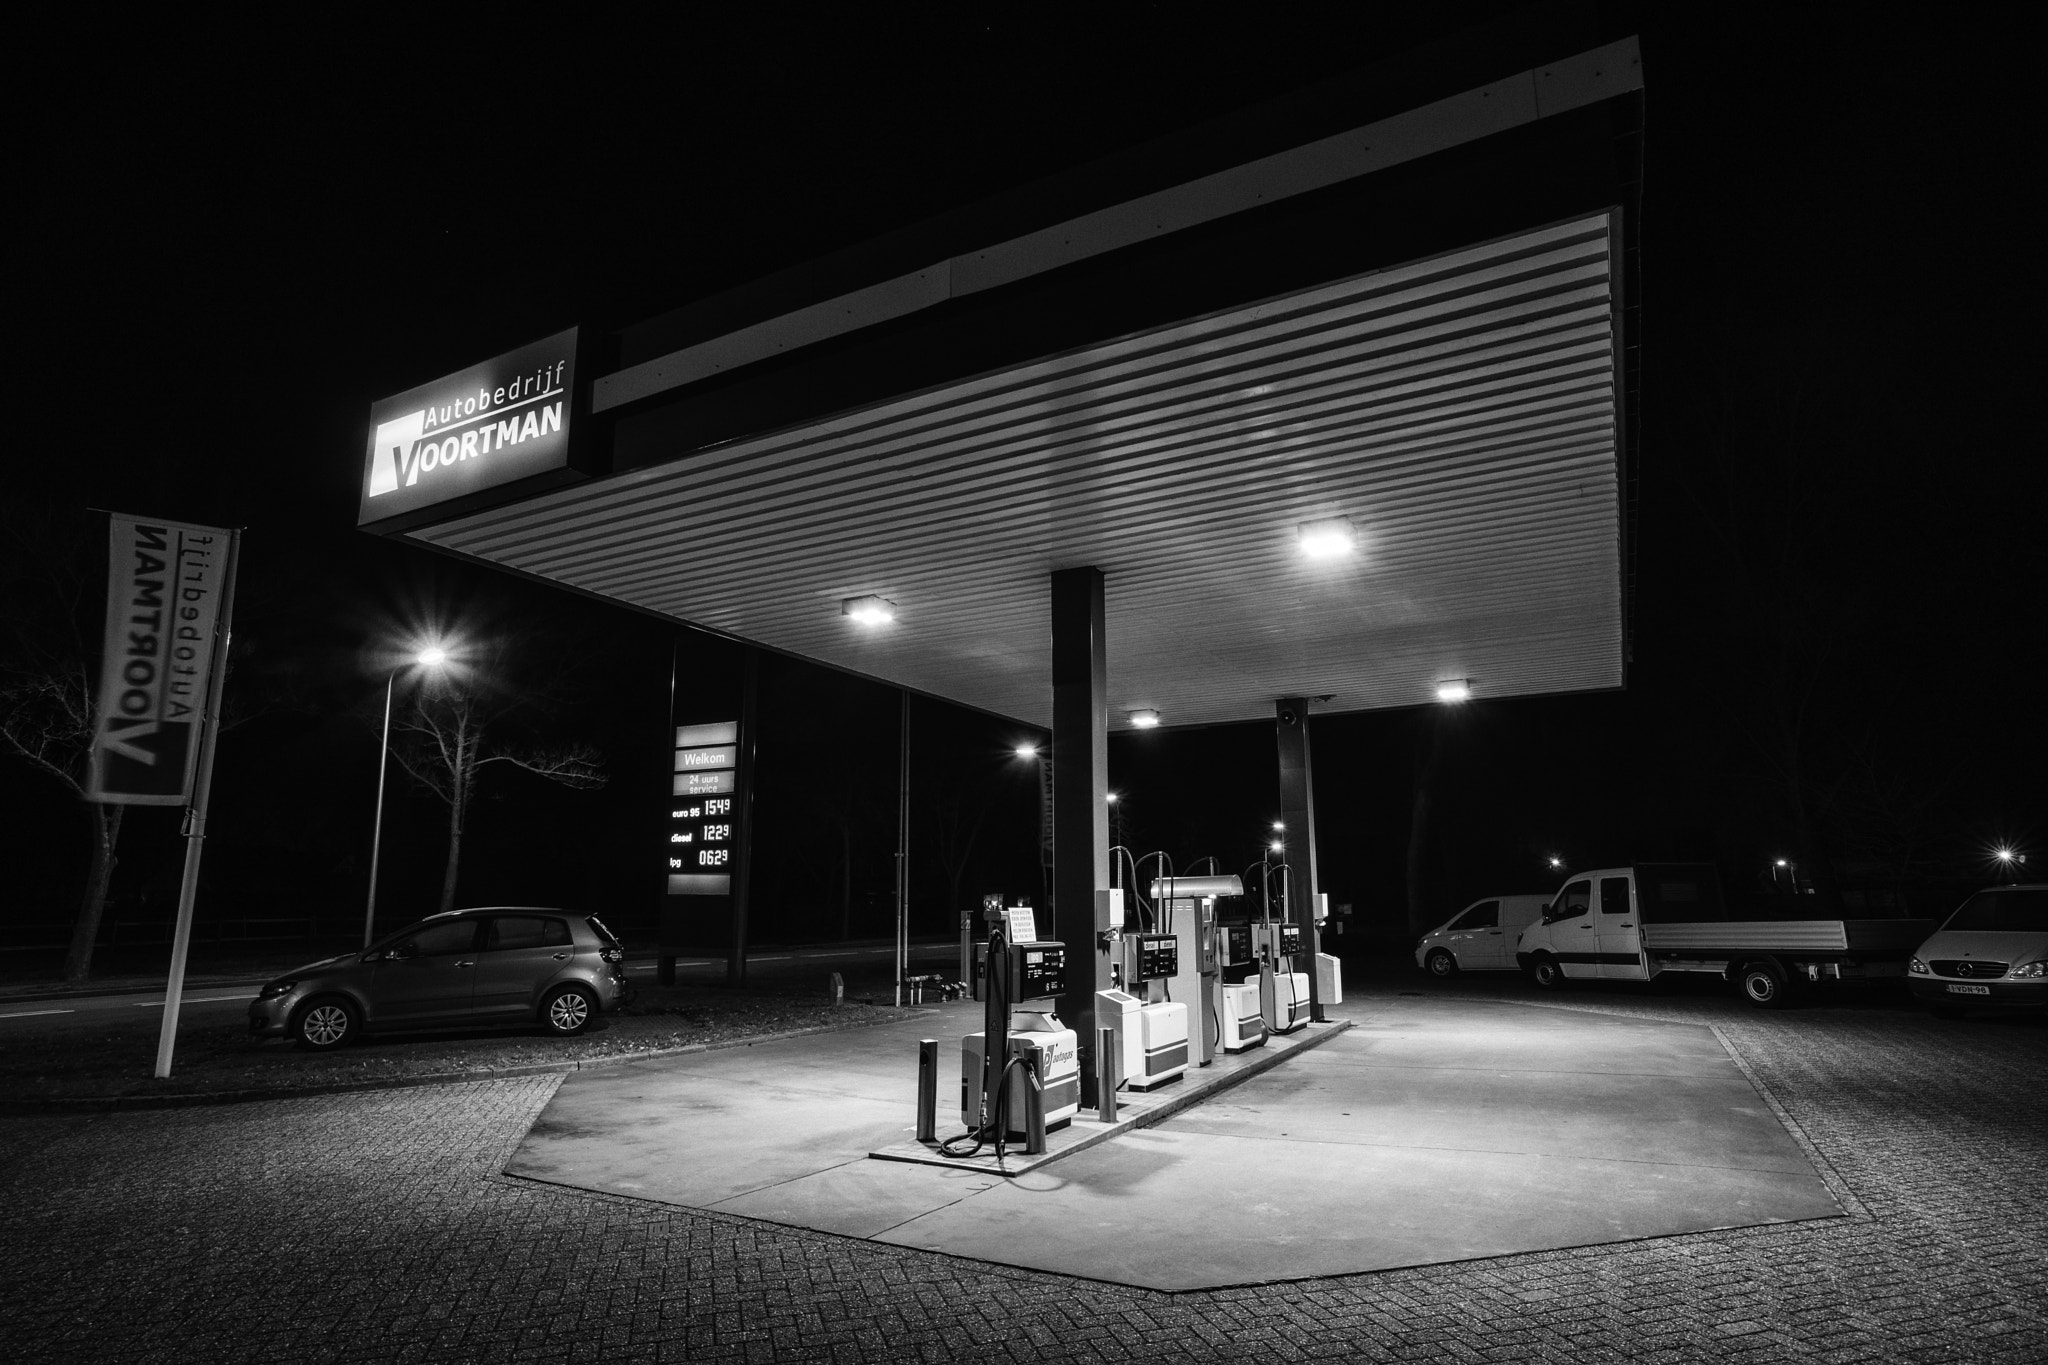 Sony a6300 sample photo. Gas station, daarle, the netherlands photography